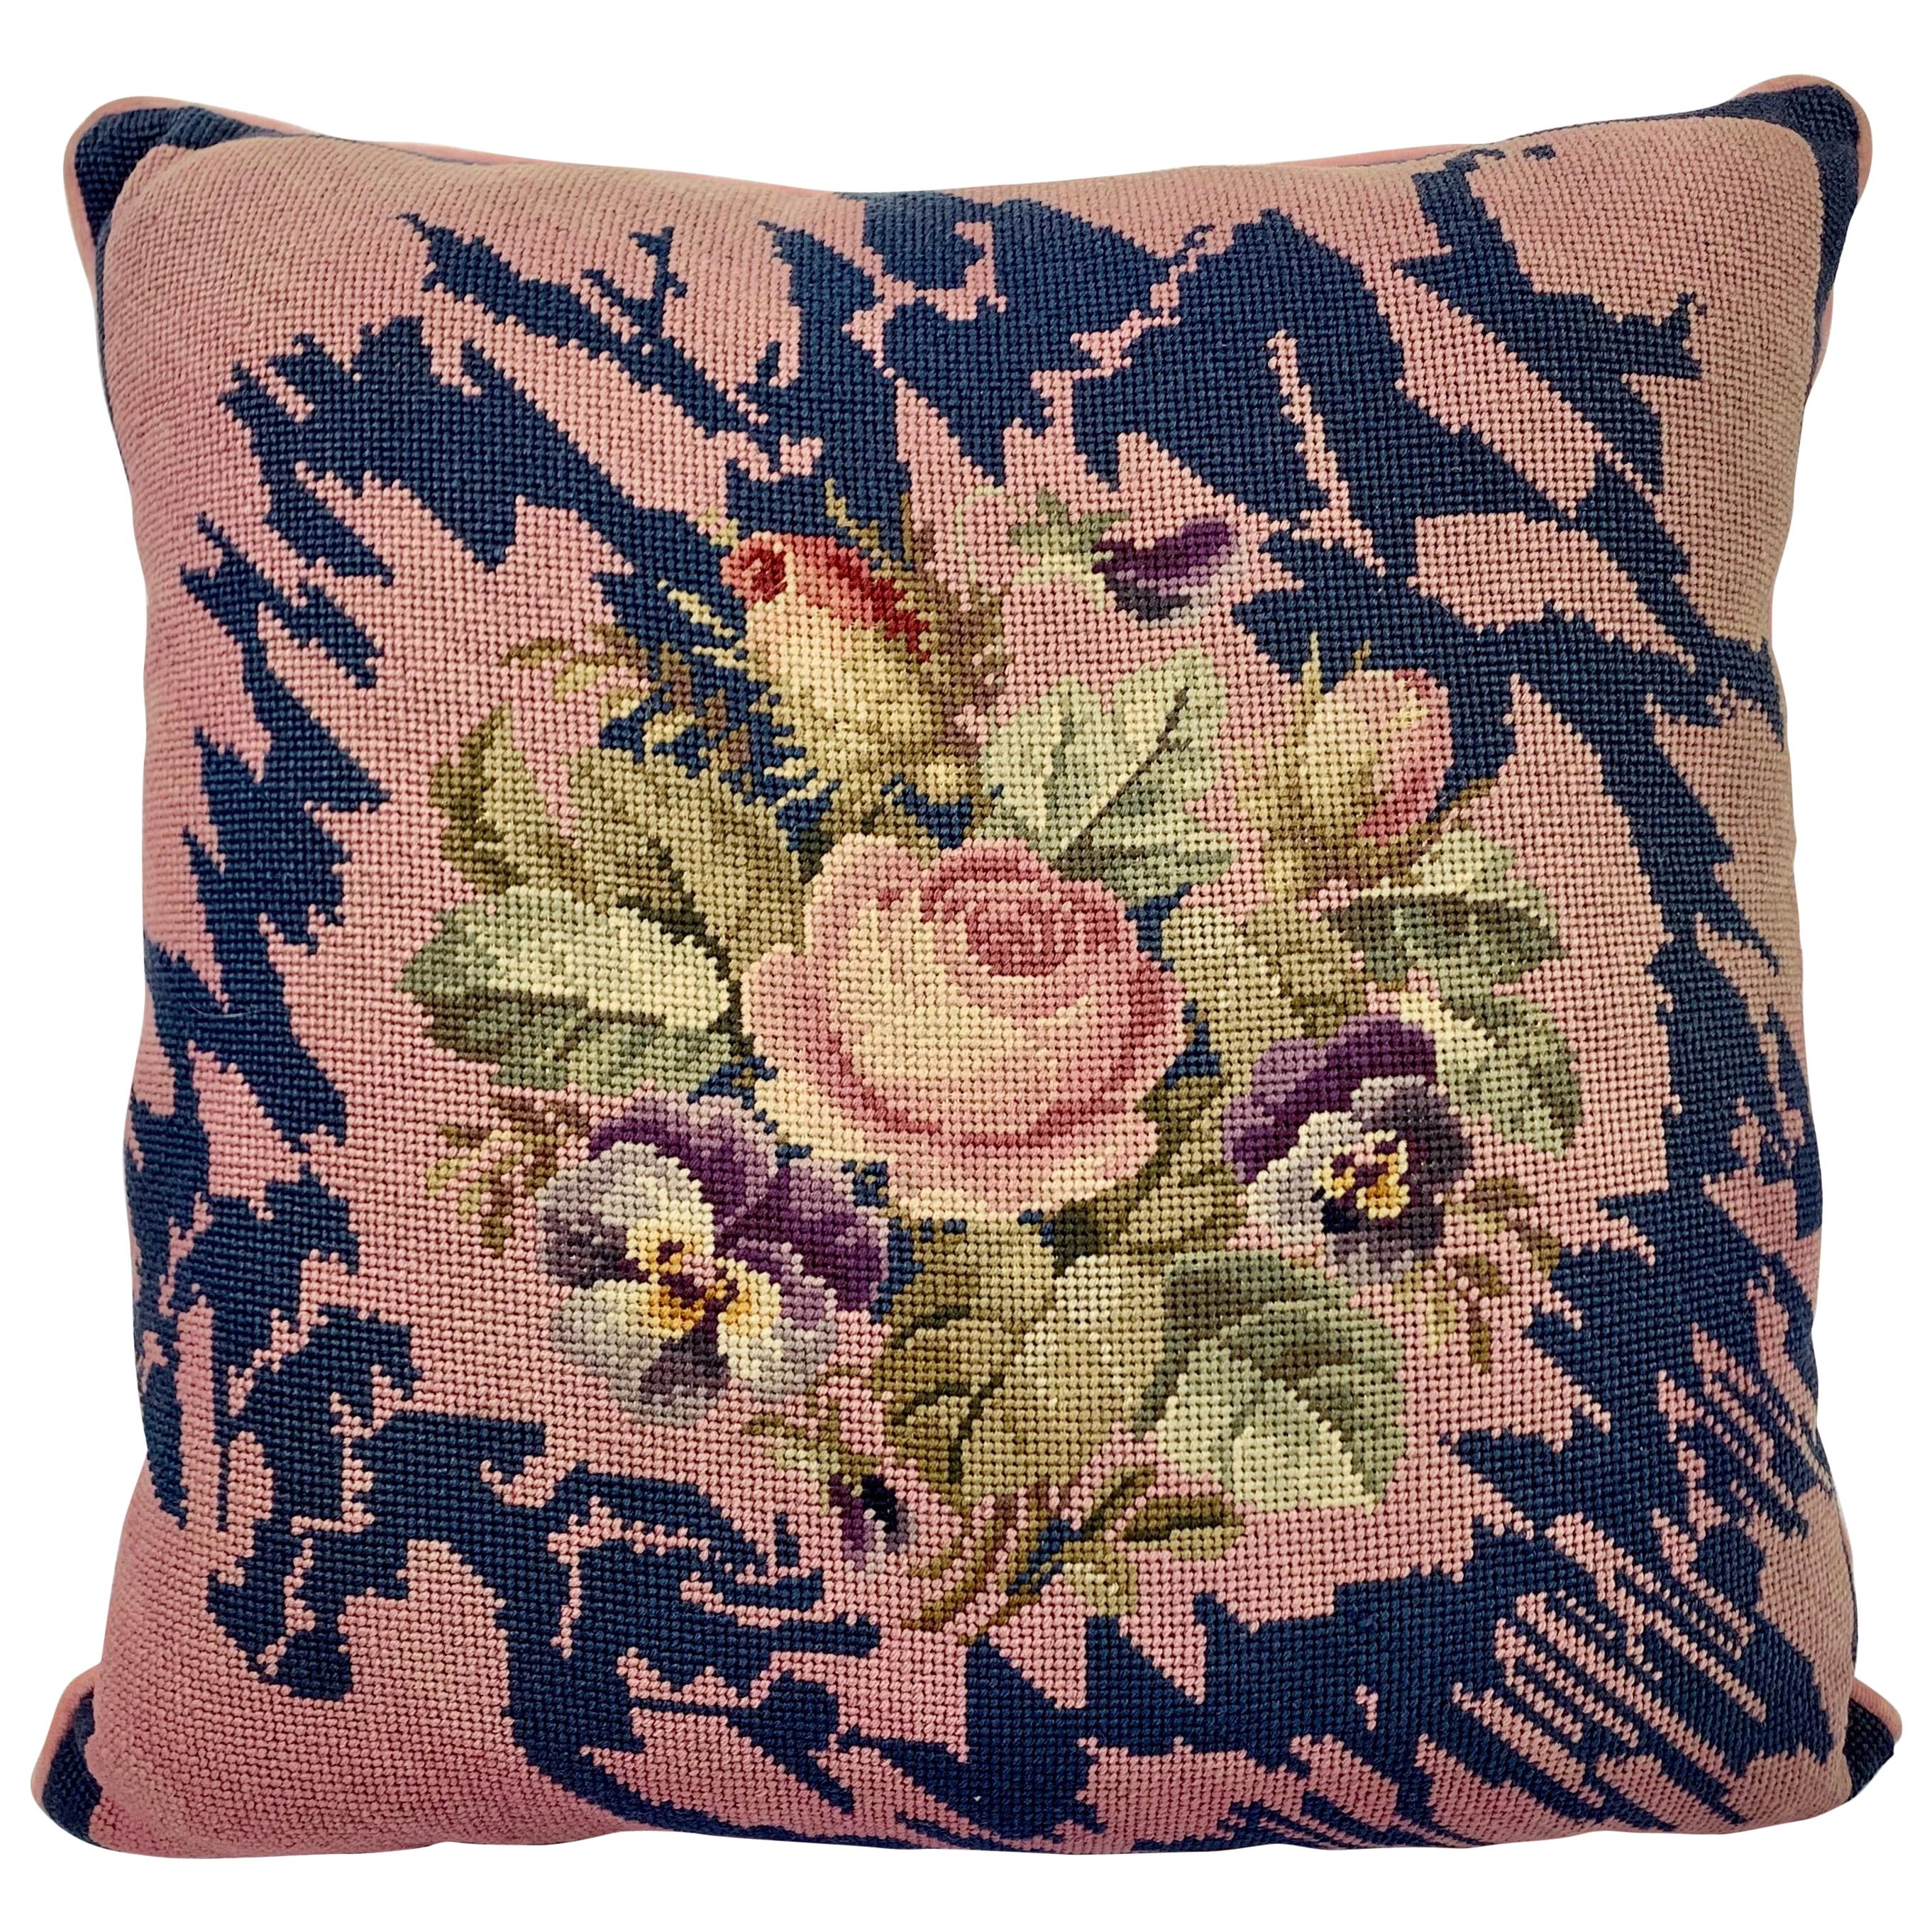 Victorian Rose Needlepoint Cushion or Decorative Pillow